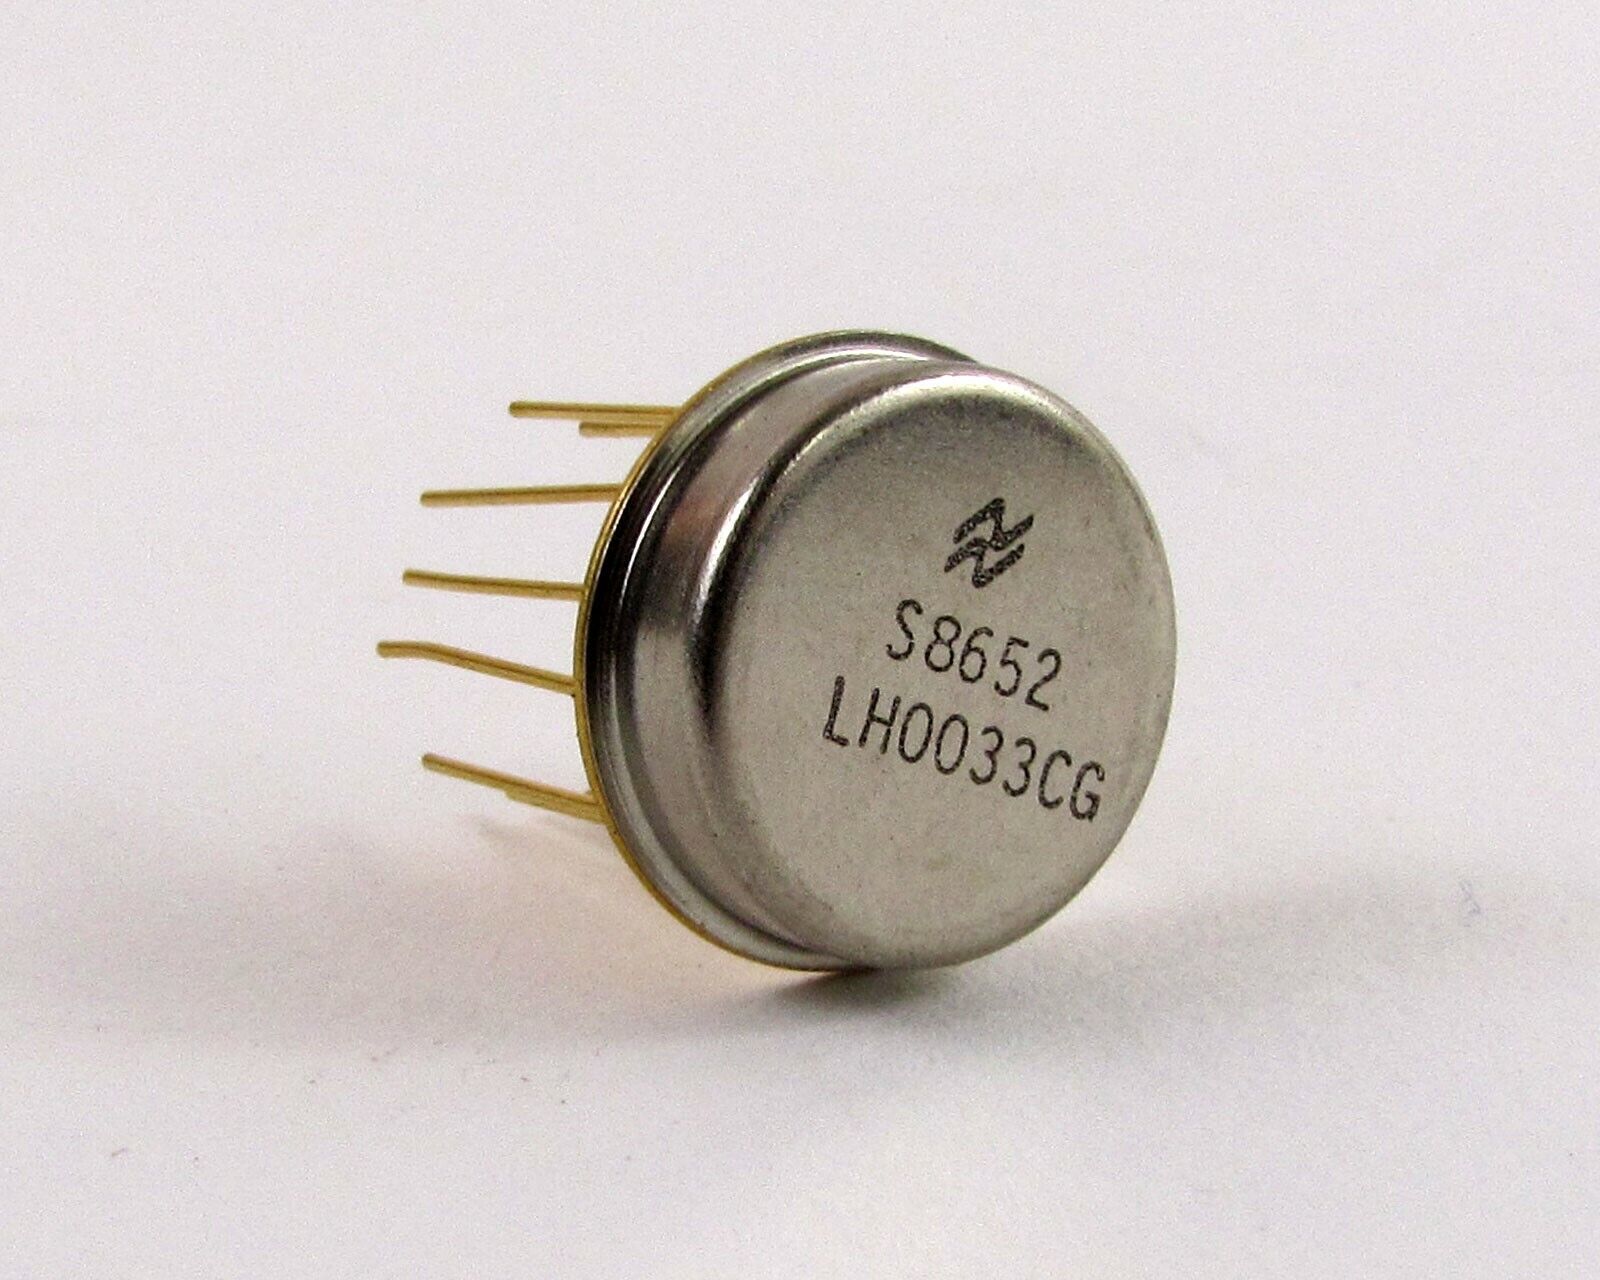 National Semiconductor Fast Buffer - 20V, Ultralow Noise - LH0033CG